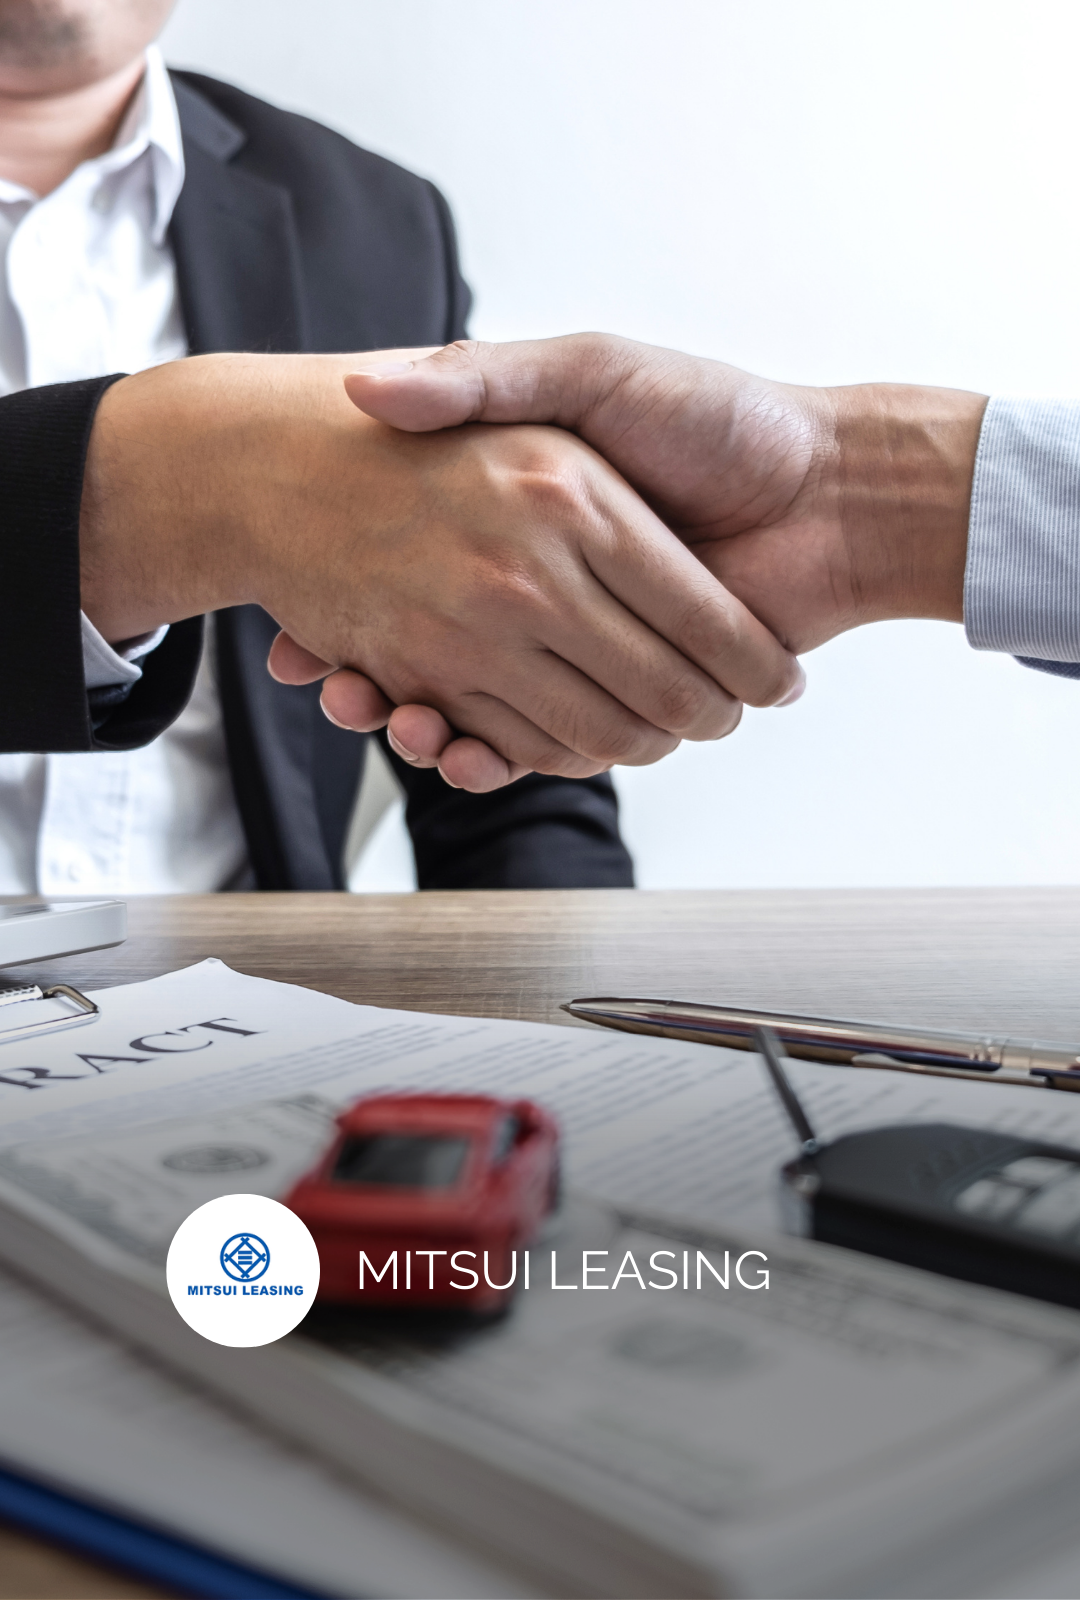 MITSUI LEASING